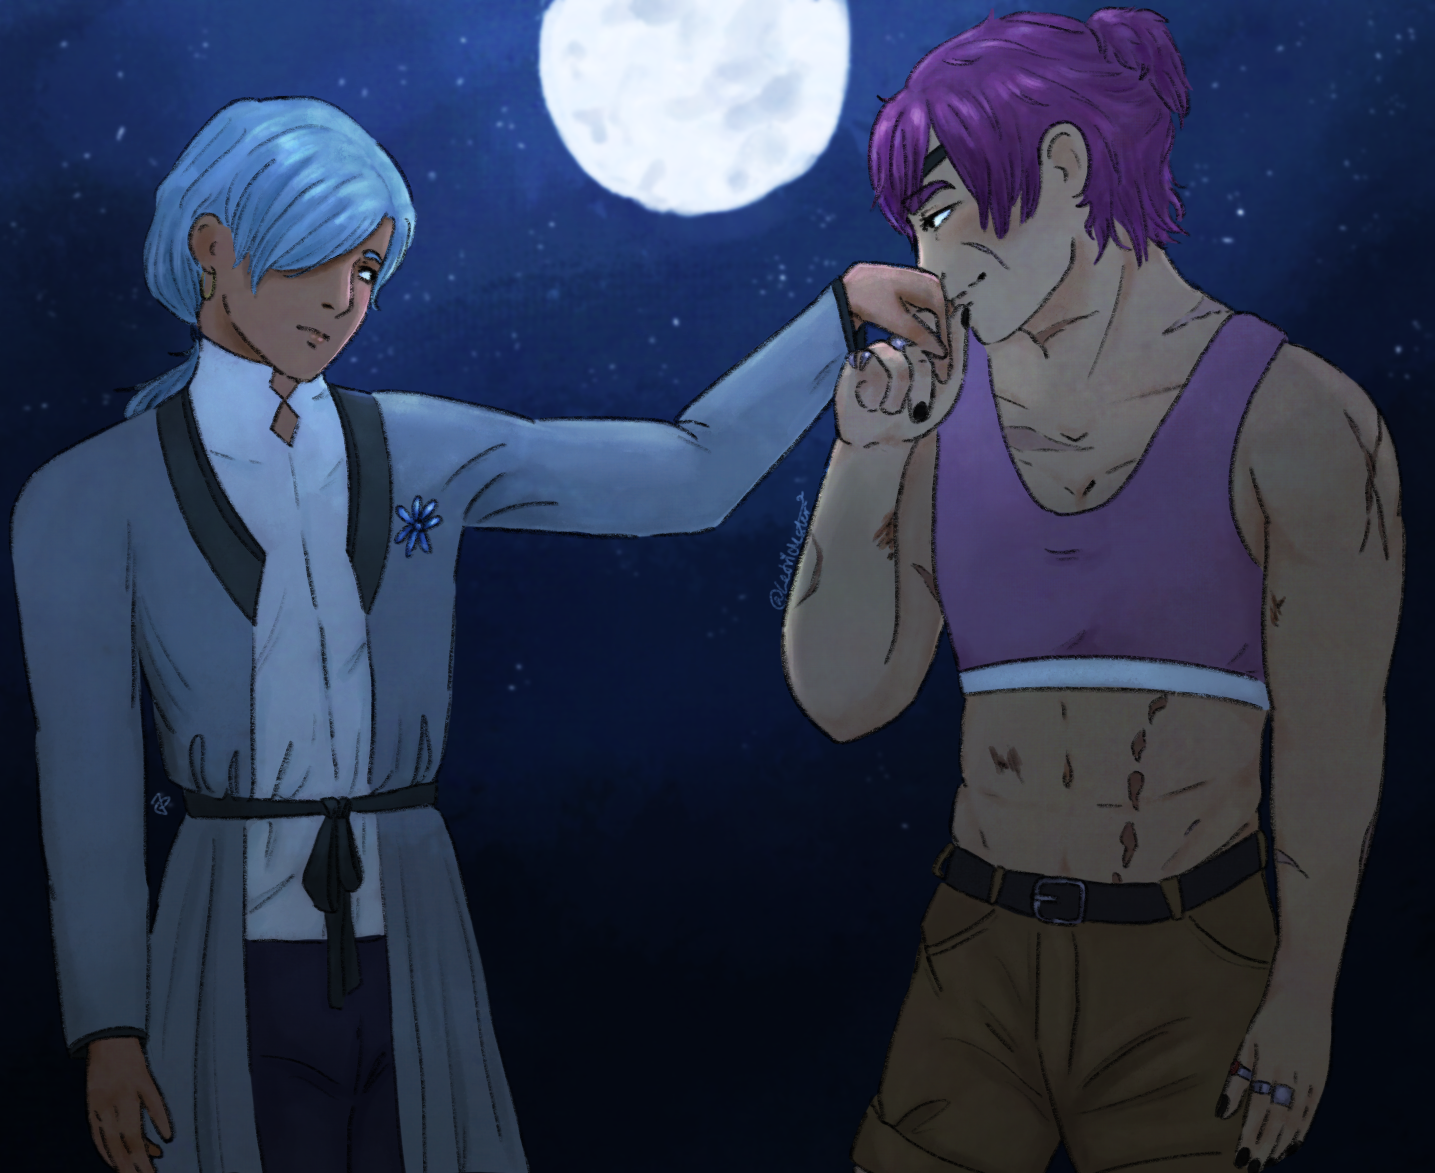 A drawing of two original characters, East and North. East has tan skin and blue hair pulled into a ponytail, he is wearing a light grey robe with a white undershirt. North is large and muscular with many scars. They have shaggy purple hair which is pulled back and they are wearing a purple sports bra and khaki shorts. They are standing in the moonlight together and North is kissing East's hand.